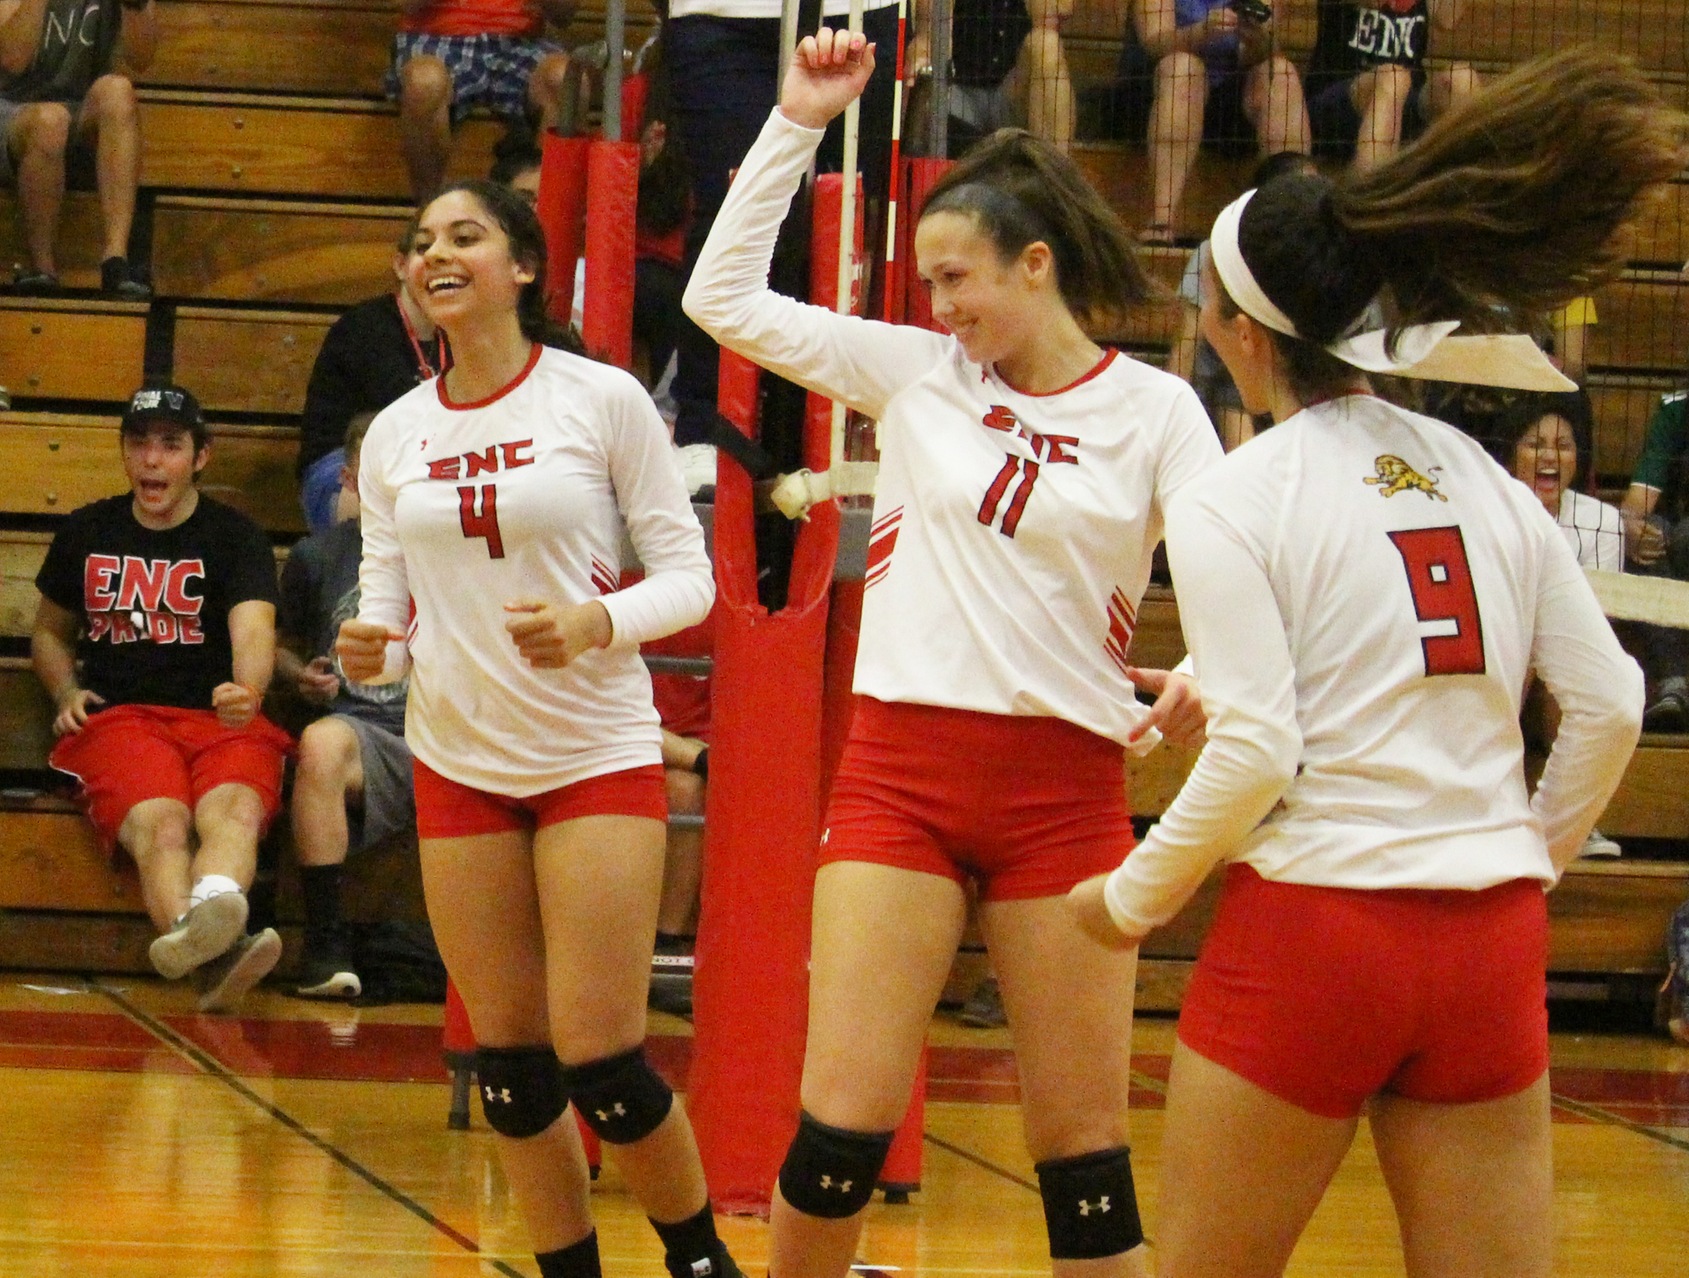 CHAMPIONSHIP BOUND: No. 1 Seed Women’s Volleyball Sweeps No. 4 New England College 3-0 in NECC Semifinals